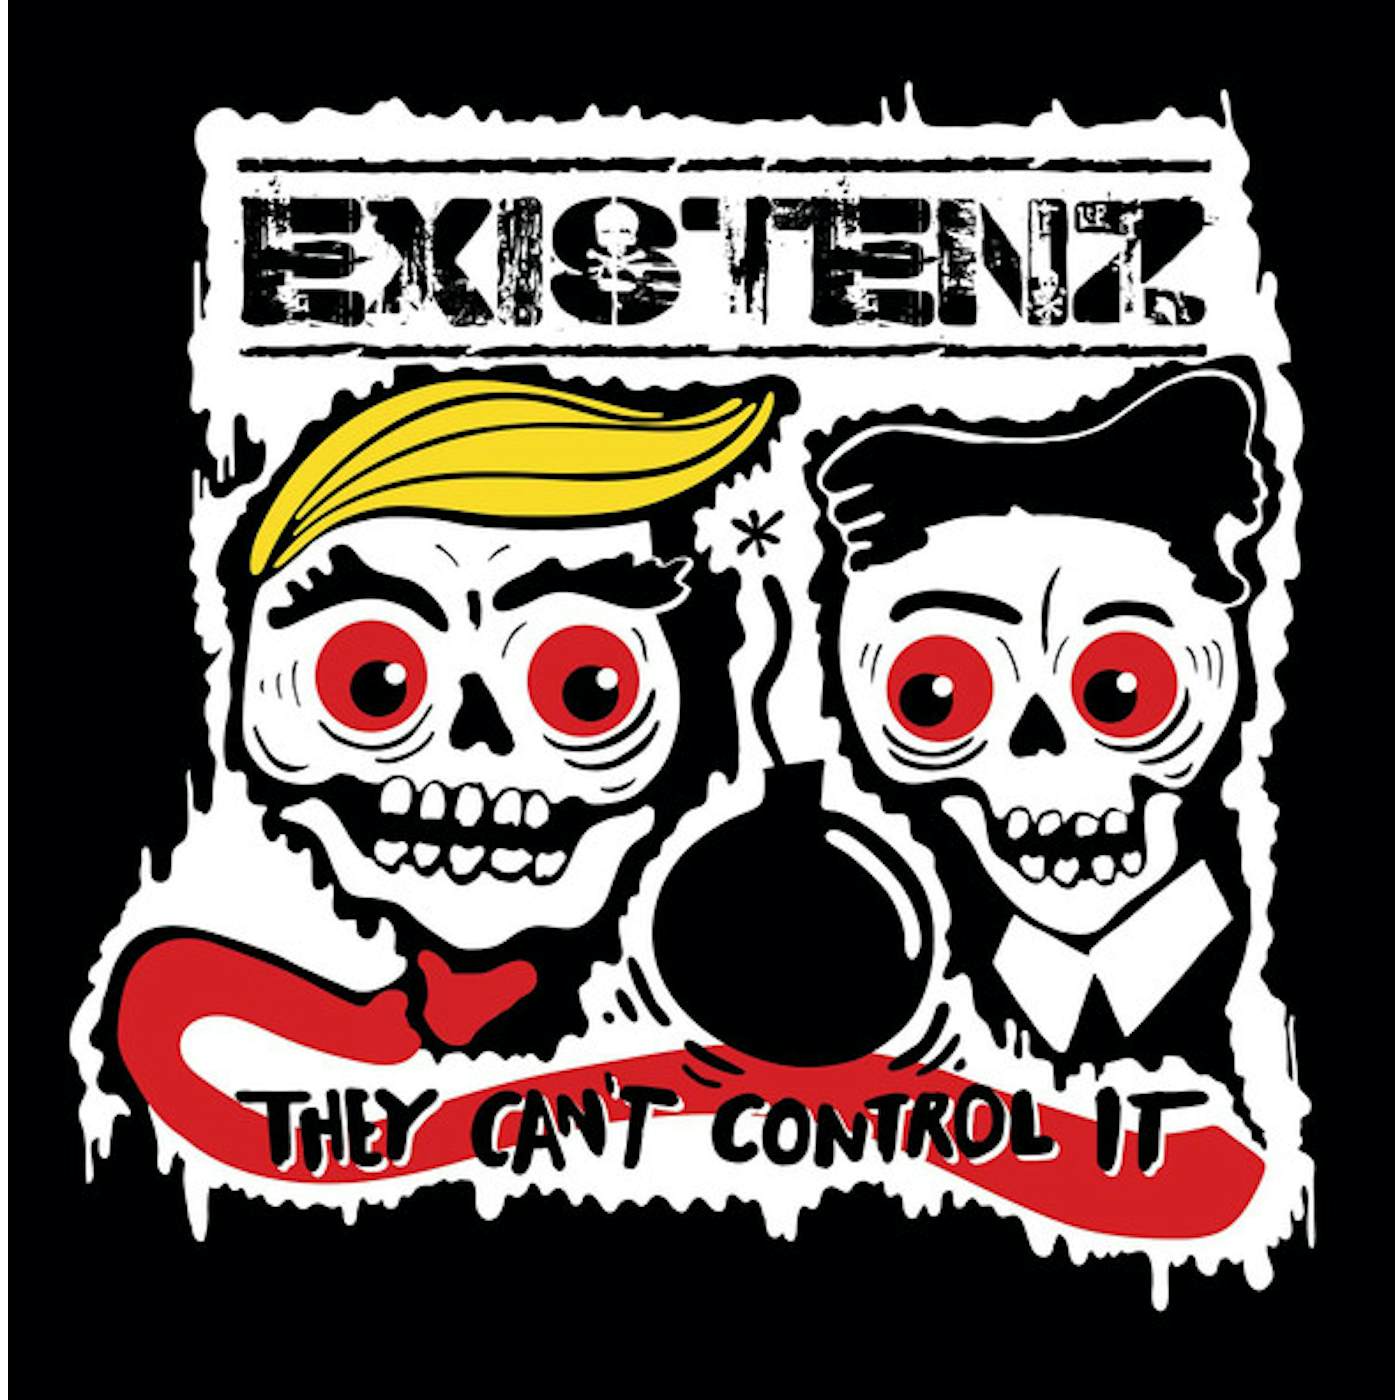 Existenz They Can't Control It Vinyl Record